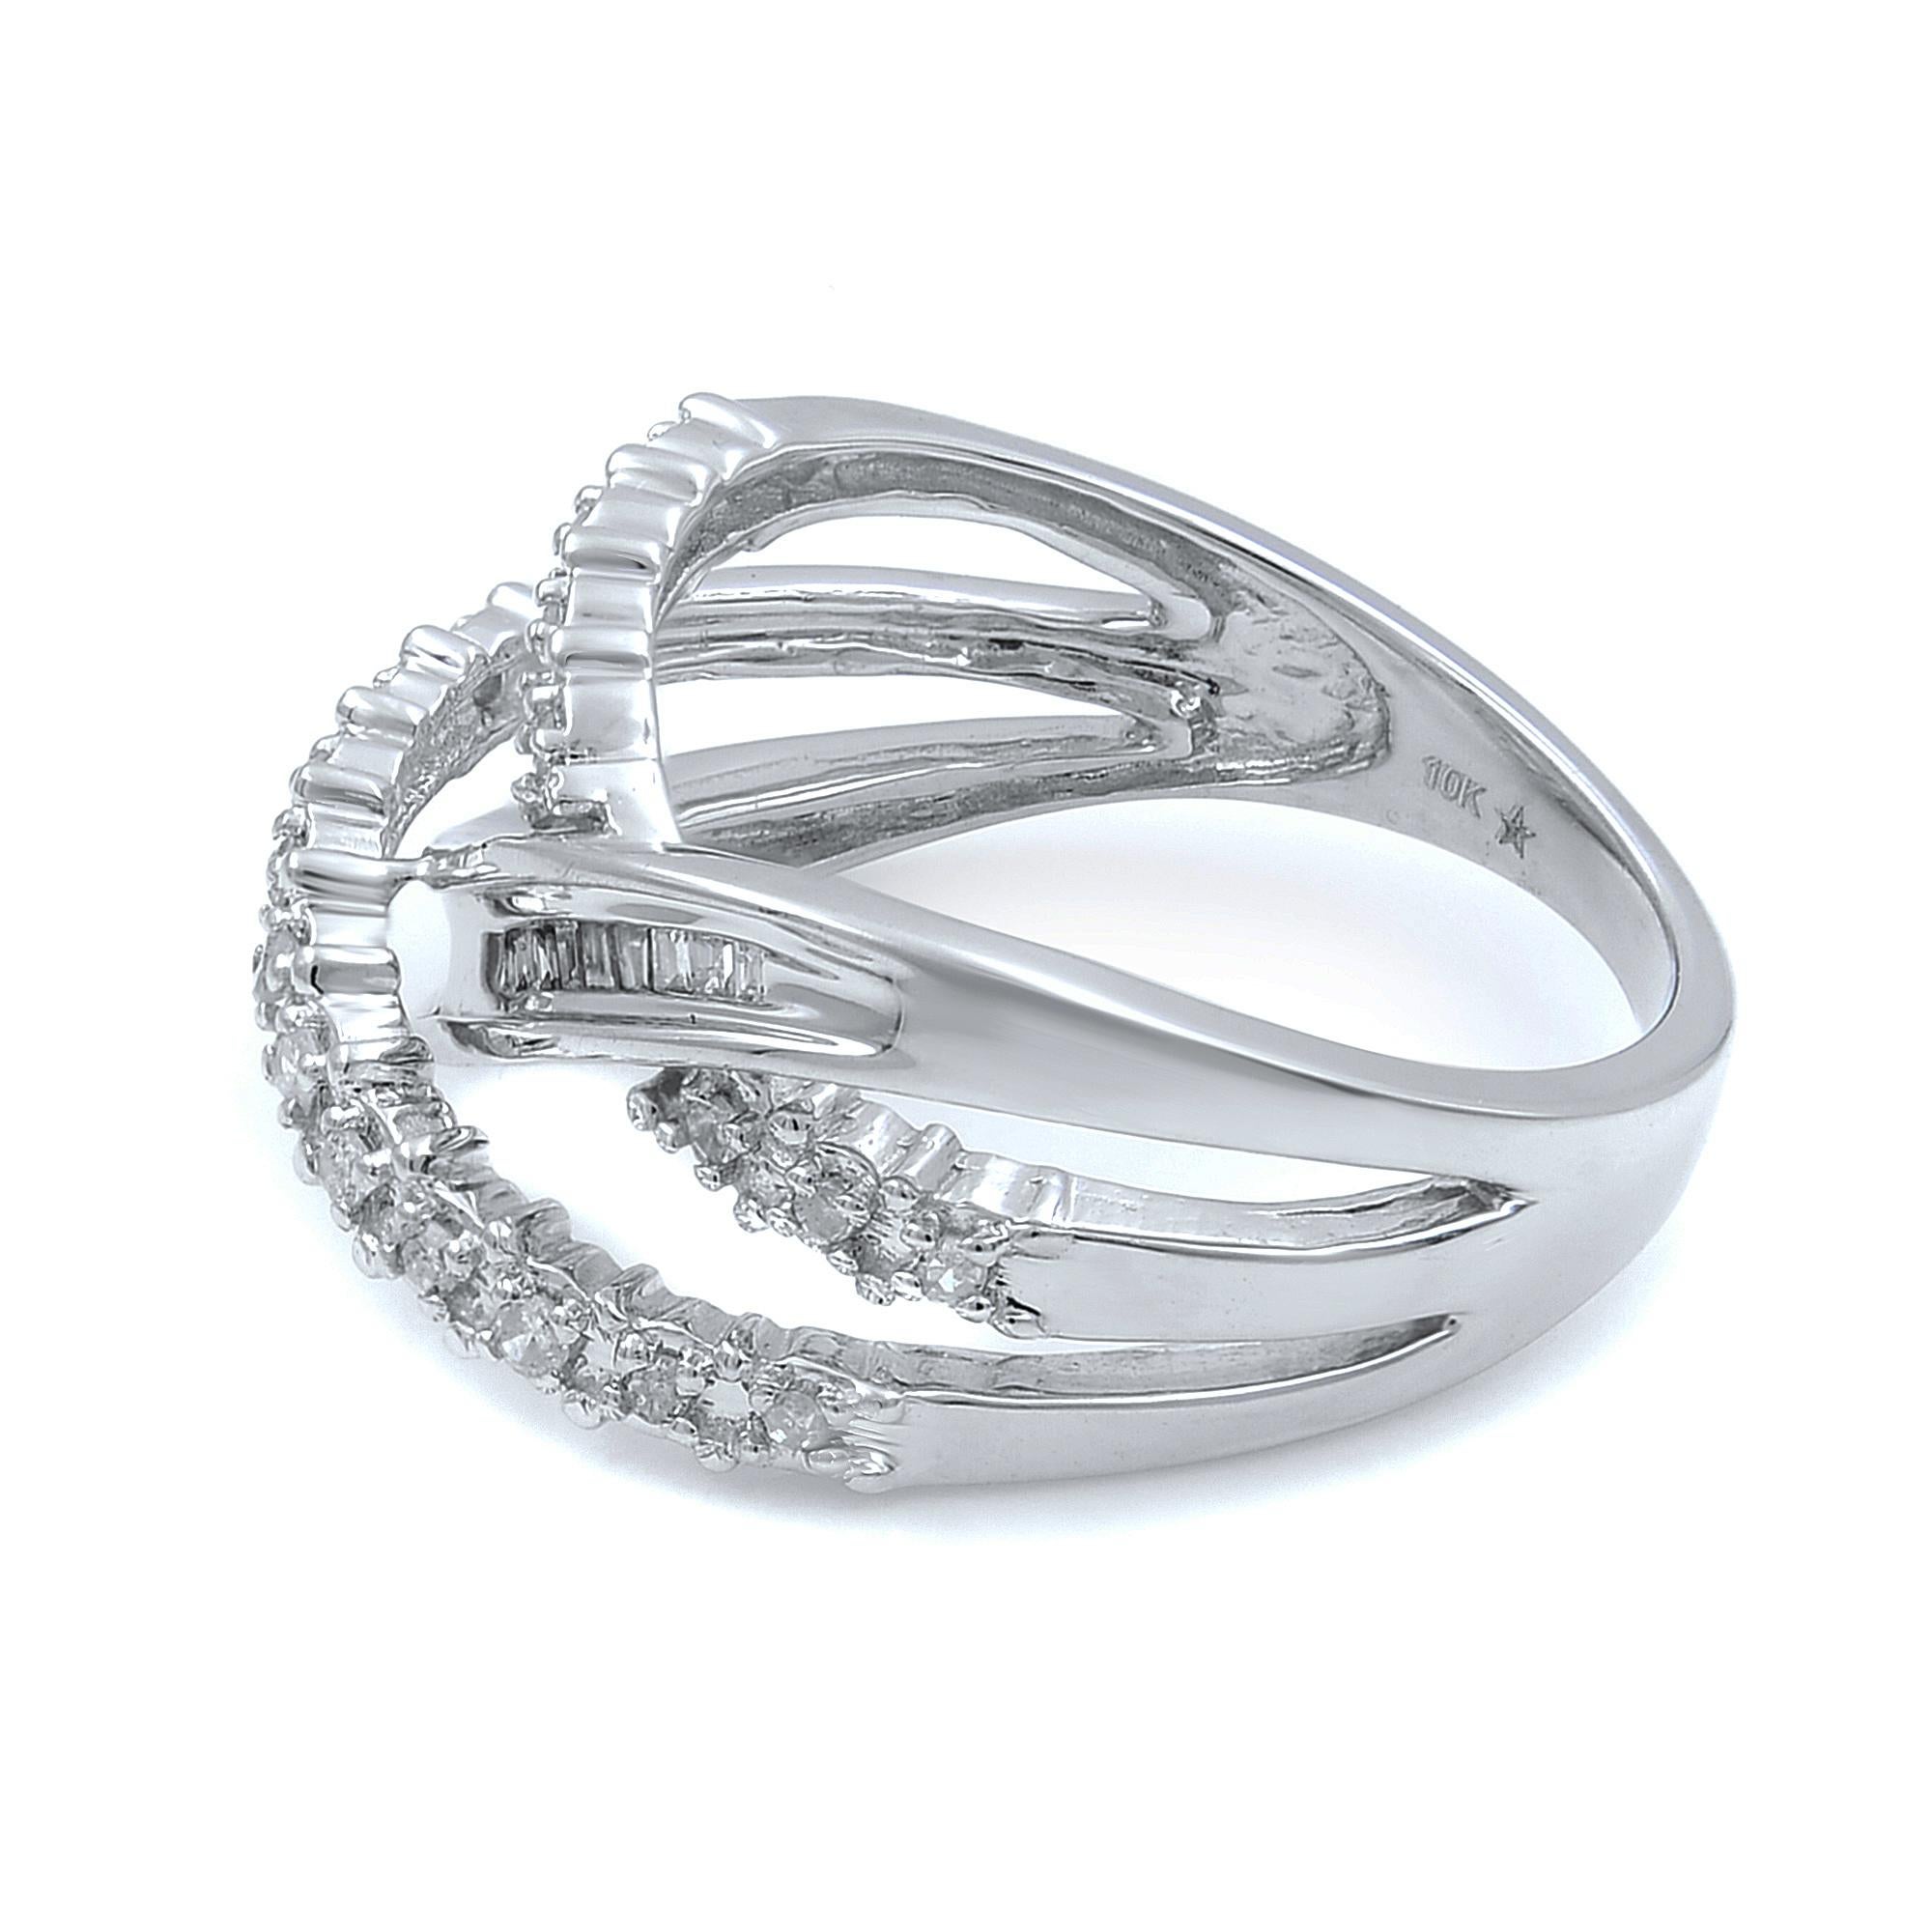 An absolutely beautiful diamond crossover multi-row wedding ring band, crafted in 10k white gold. This ring is set with round and baguette diamonds. The width of the ring is 10.7mm and the total diamond carat weight is 0.60cts. The ring weighs 4.80